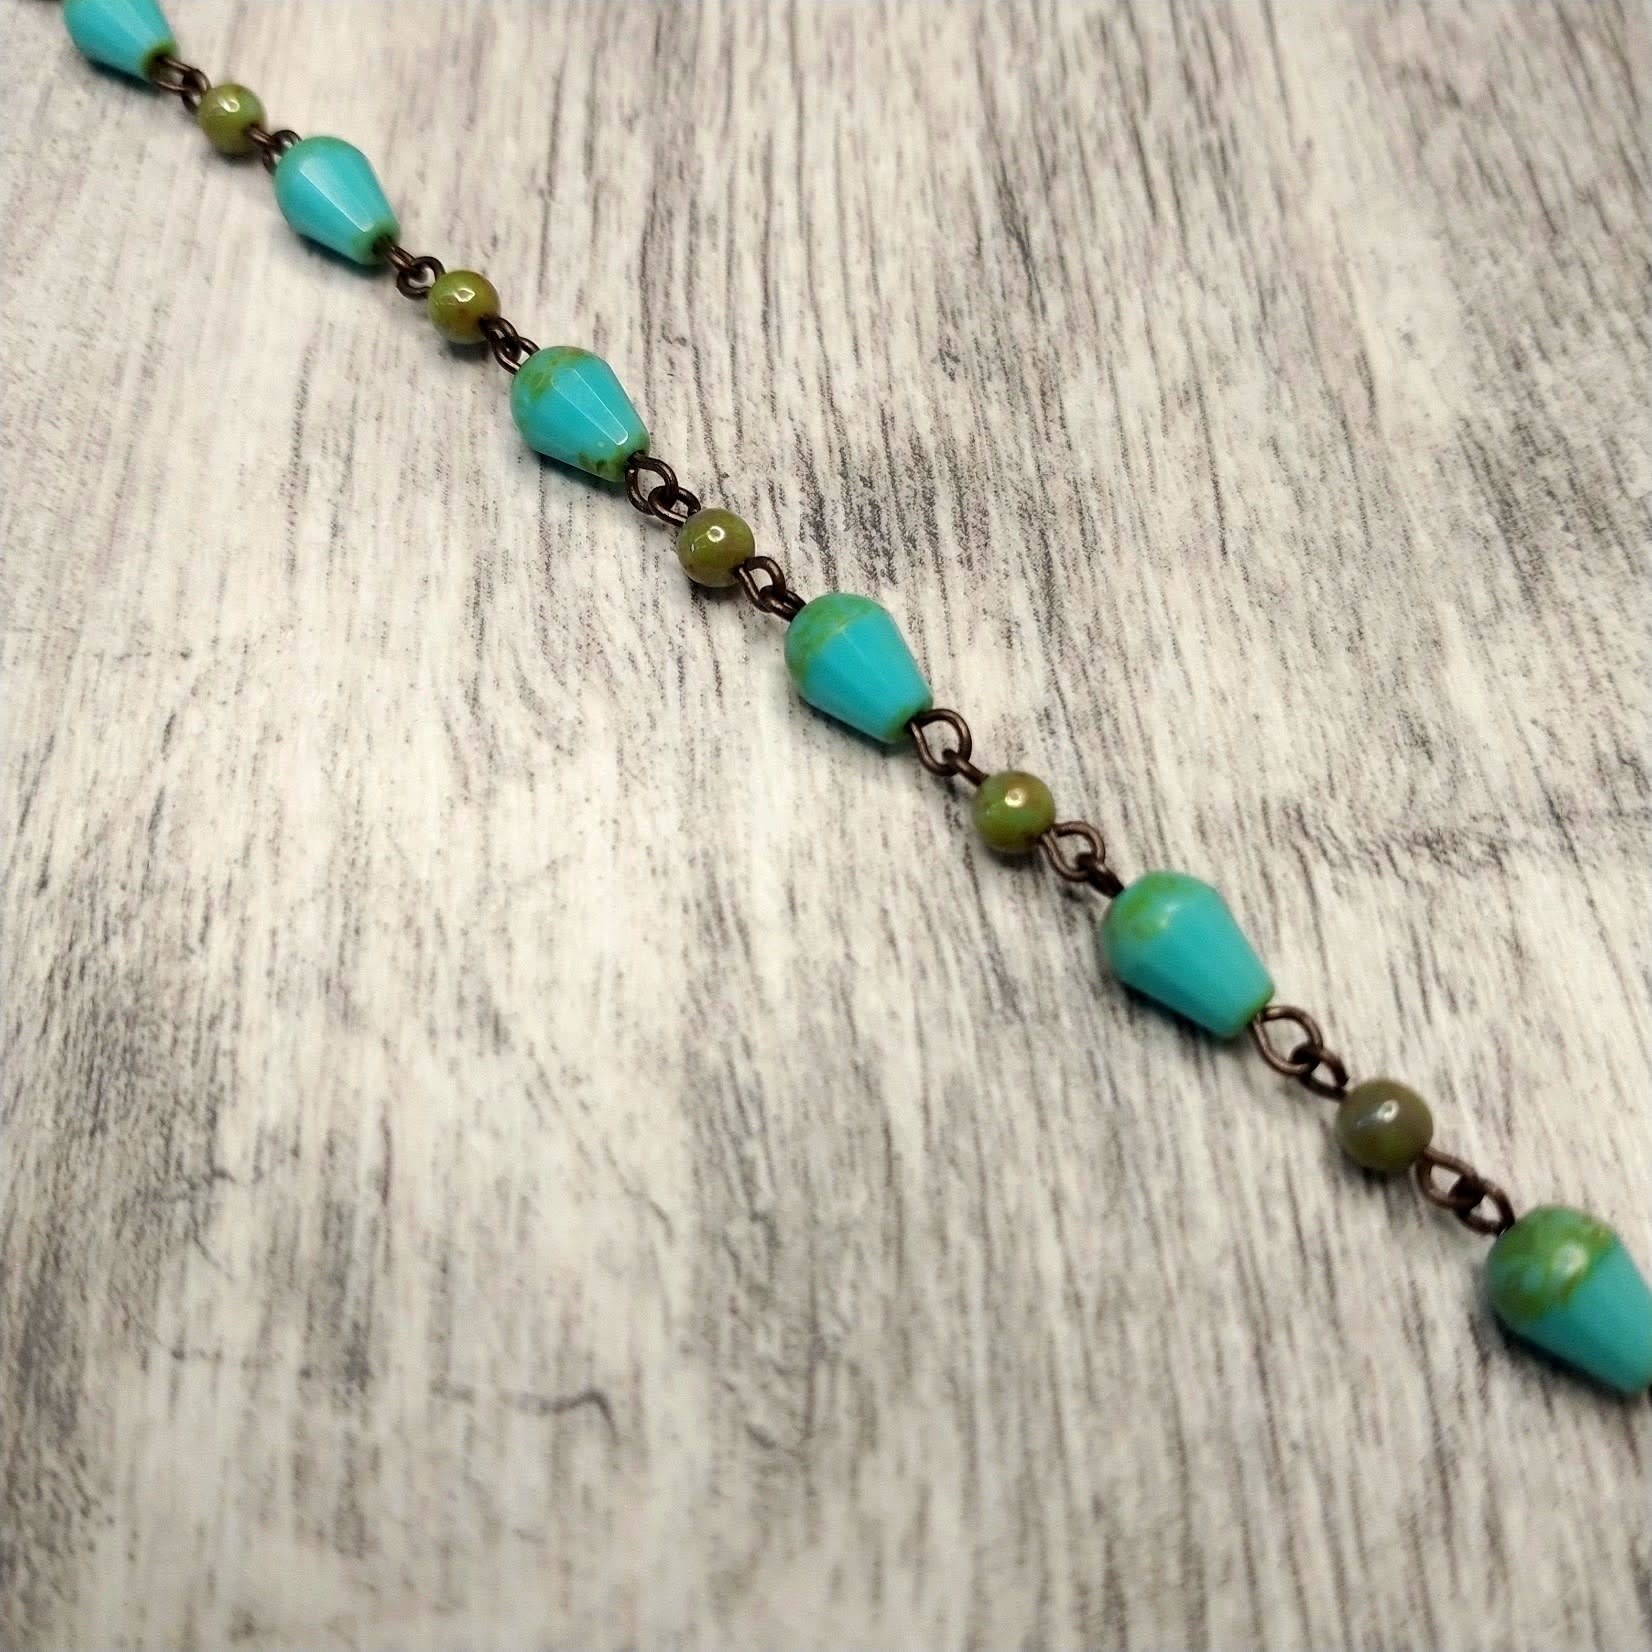 Czech Glass Beaded Chain Turquoise Drops - 1 foot